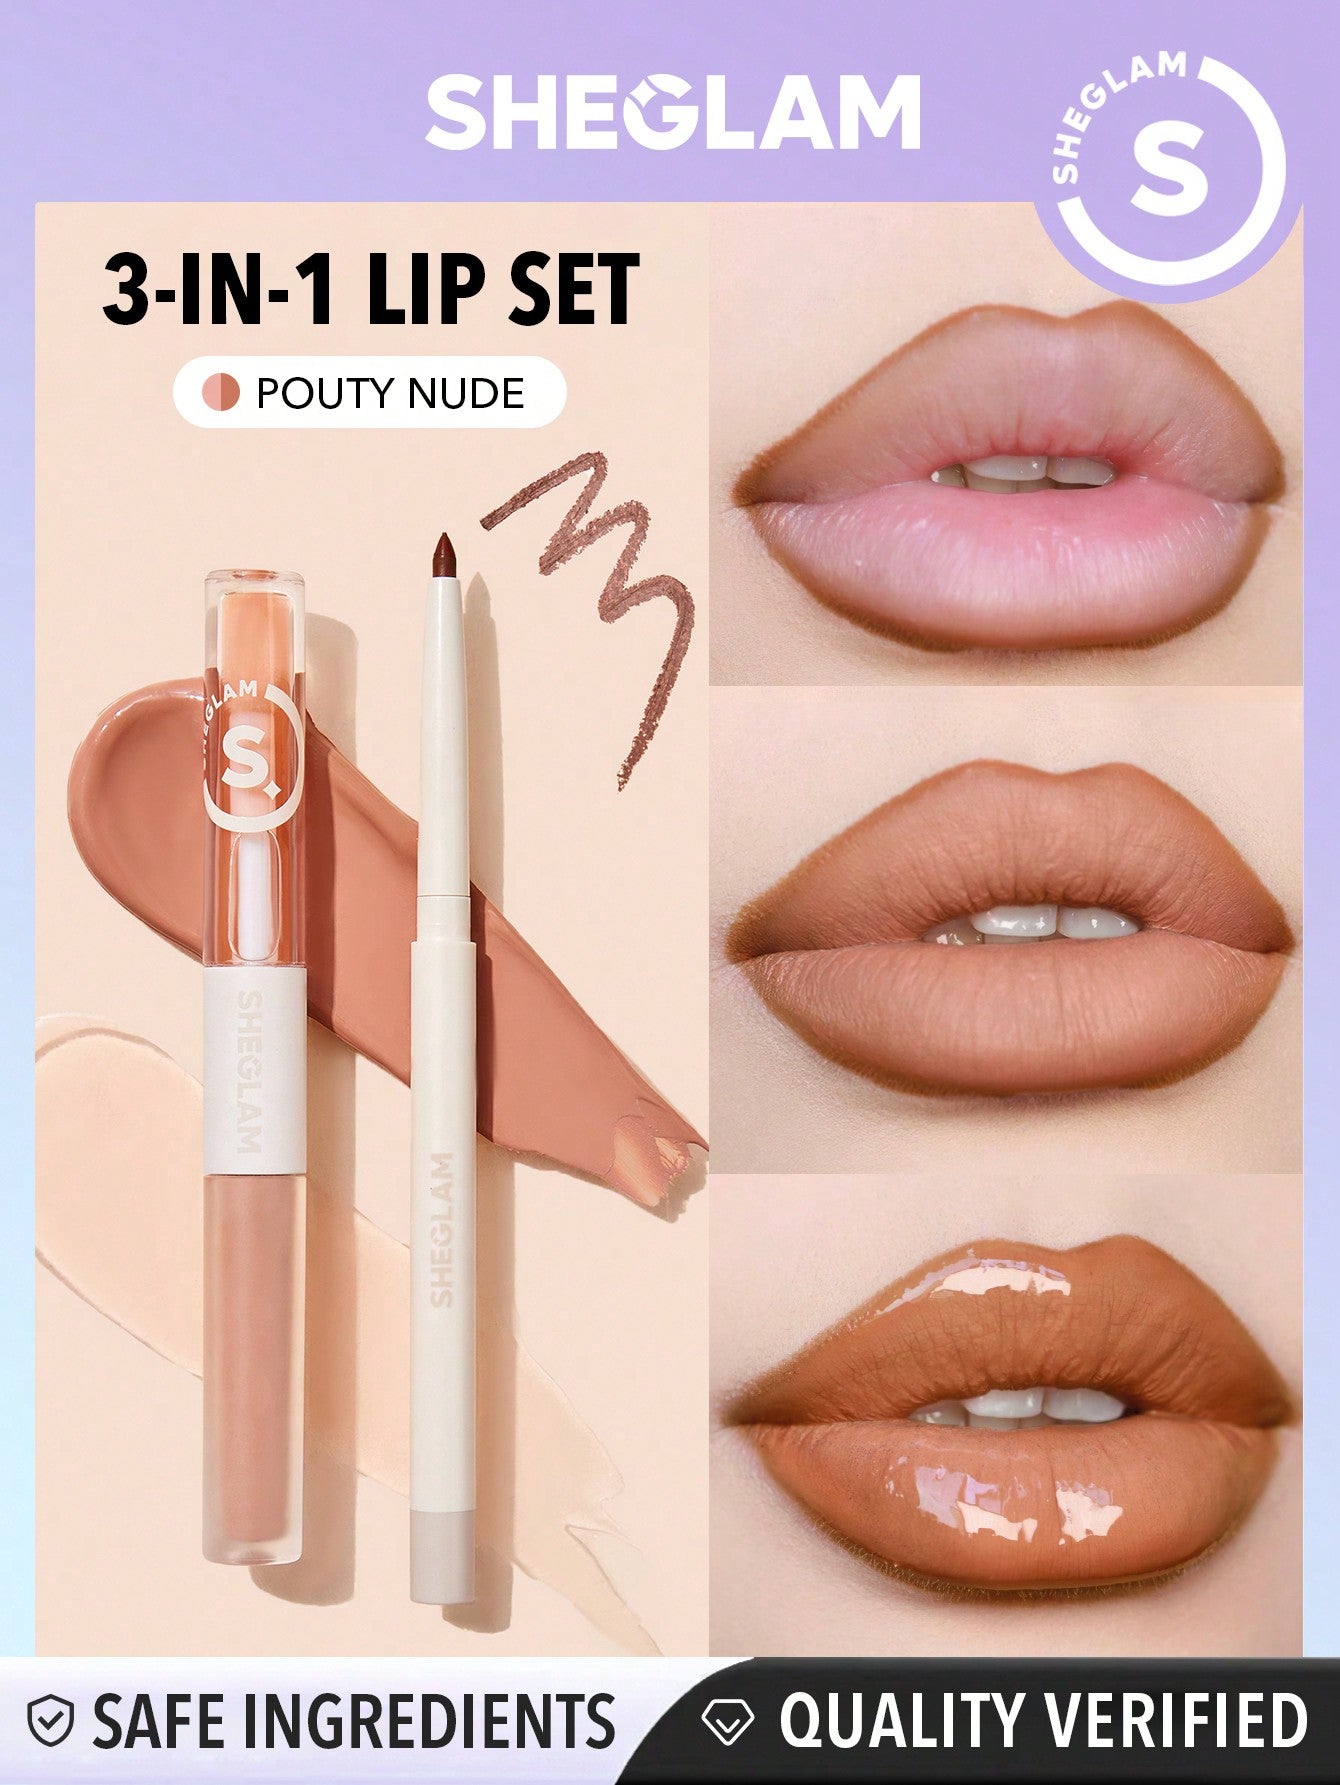 SHEGLAM Soft 90's Glam Lip Liner And Lip Duo Set-Moody Taupe Lip Set 3-In-1 Lip Makeup Plumping Lip Gloss Moisturizing Plant Extracts Long Lasting Liquid Lipstick - Negative Apparel